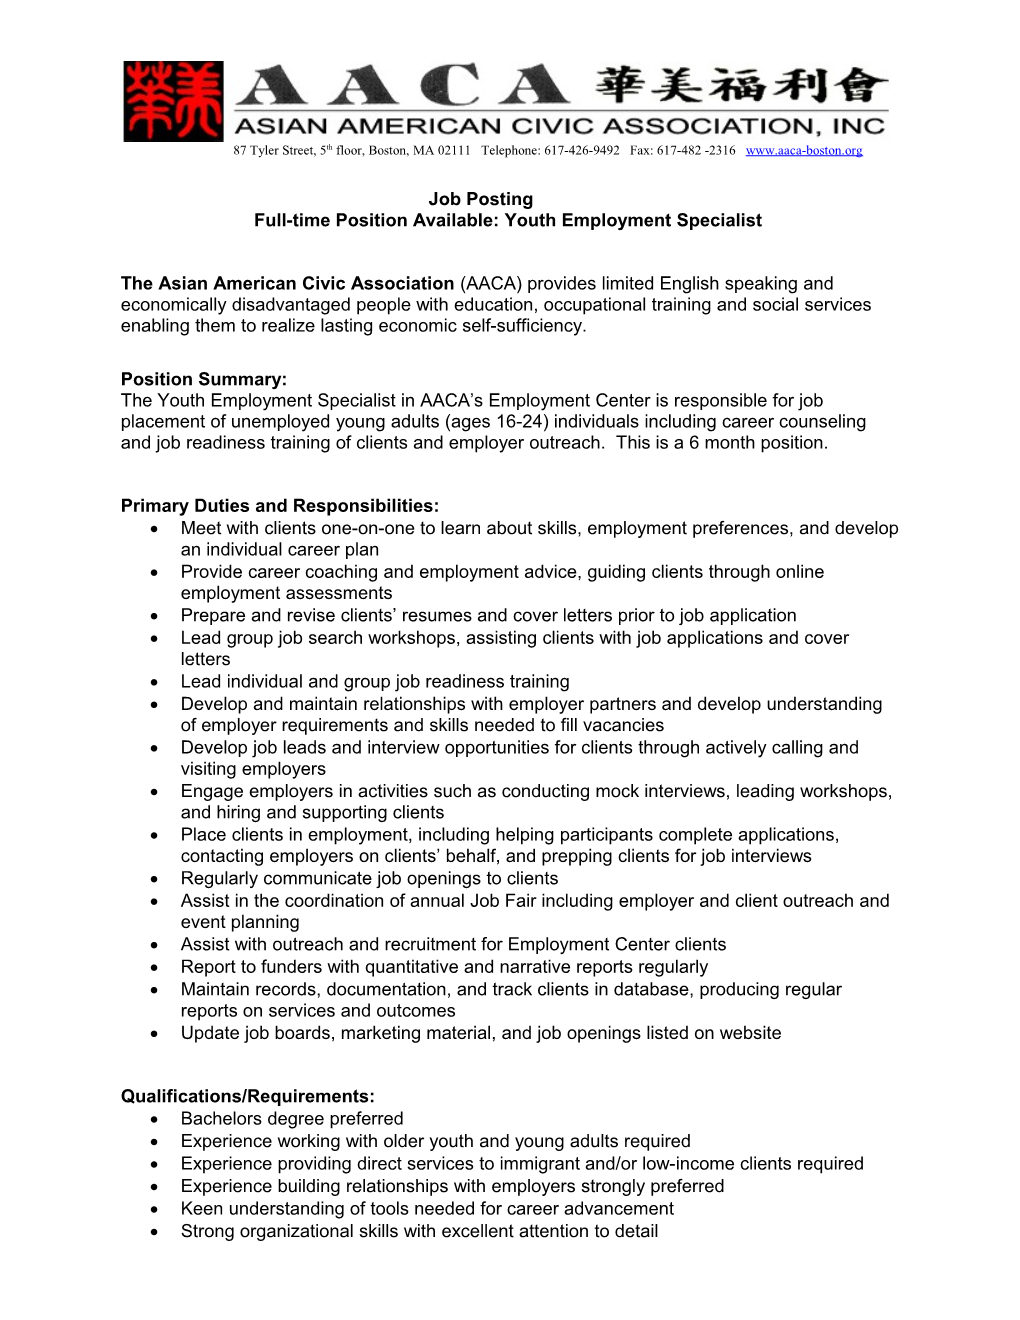 Full-Time Position Available: Youth Employment Specialist